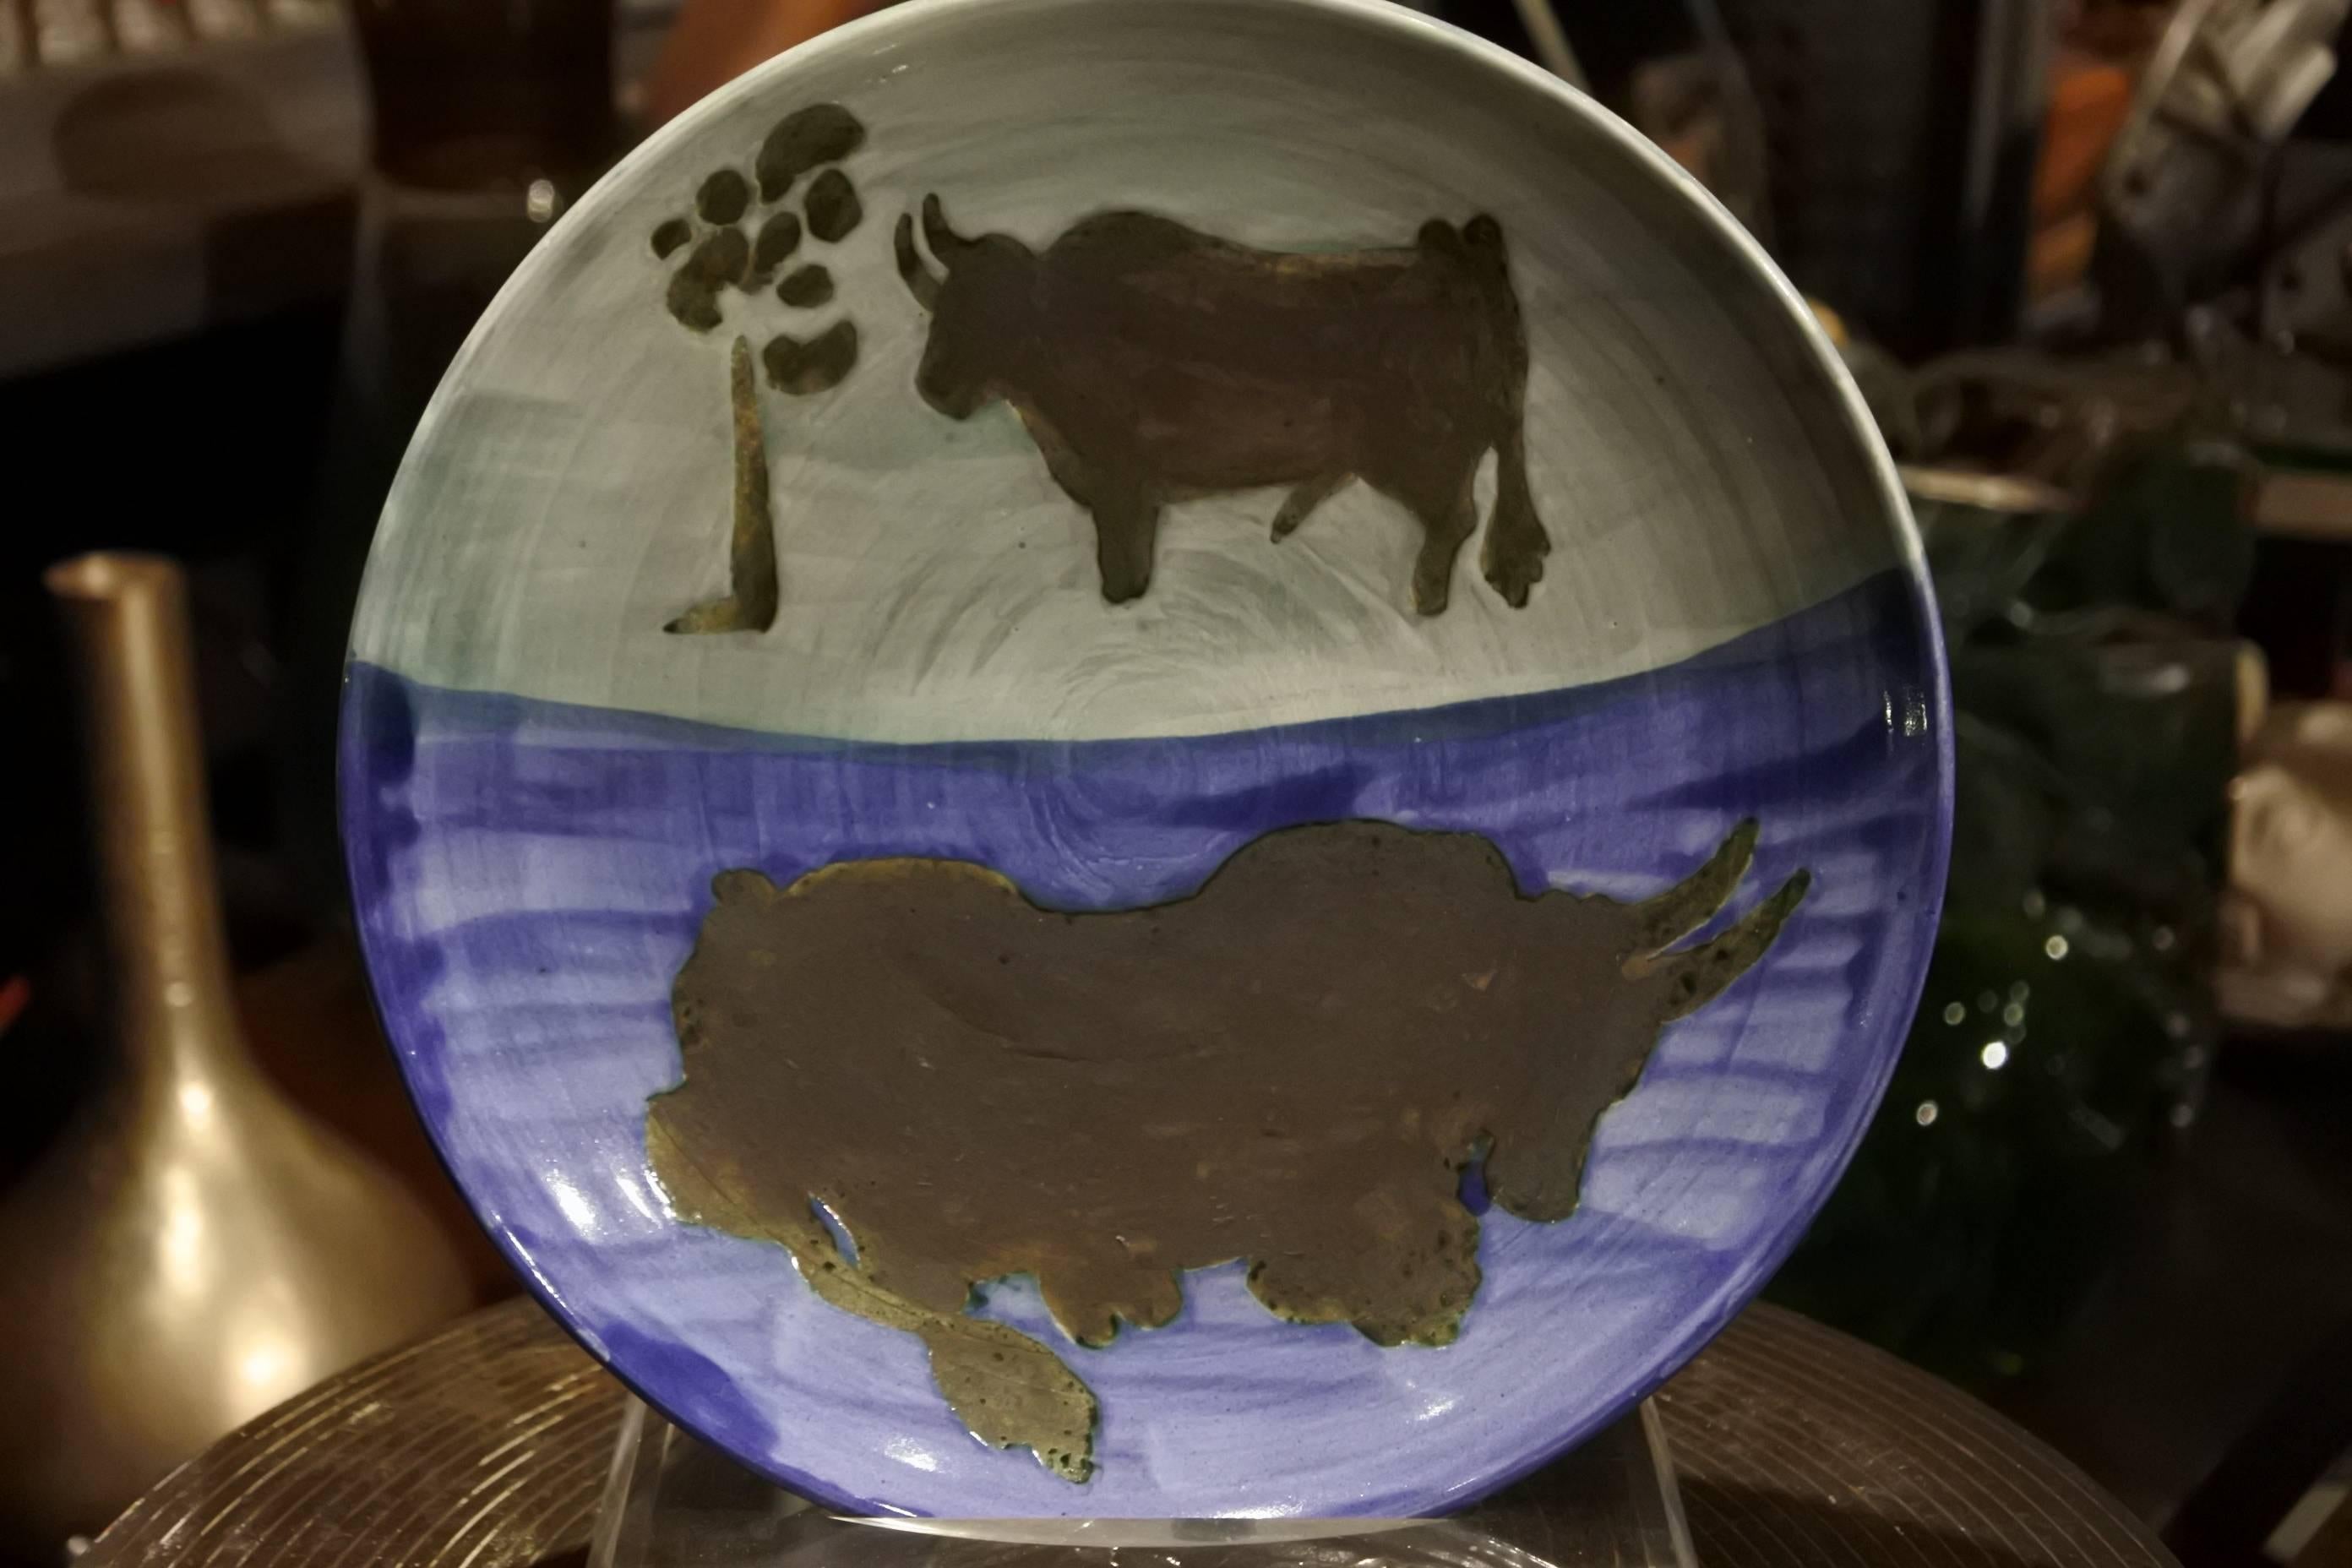 Plate from Picasso's time working with ceramics around the mid-1950s

Unusual color-way in this particular bull motif series, in excellent, original unrestored condition. 

No chips, cracks or blemishes present.



 